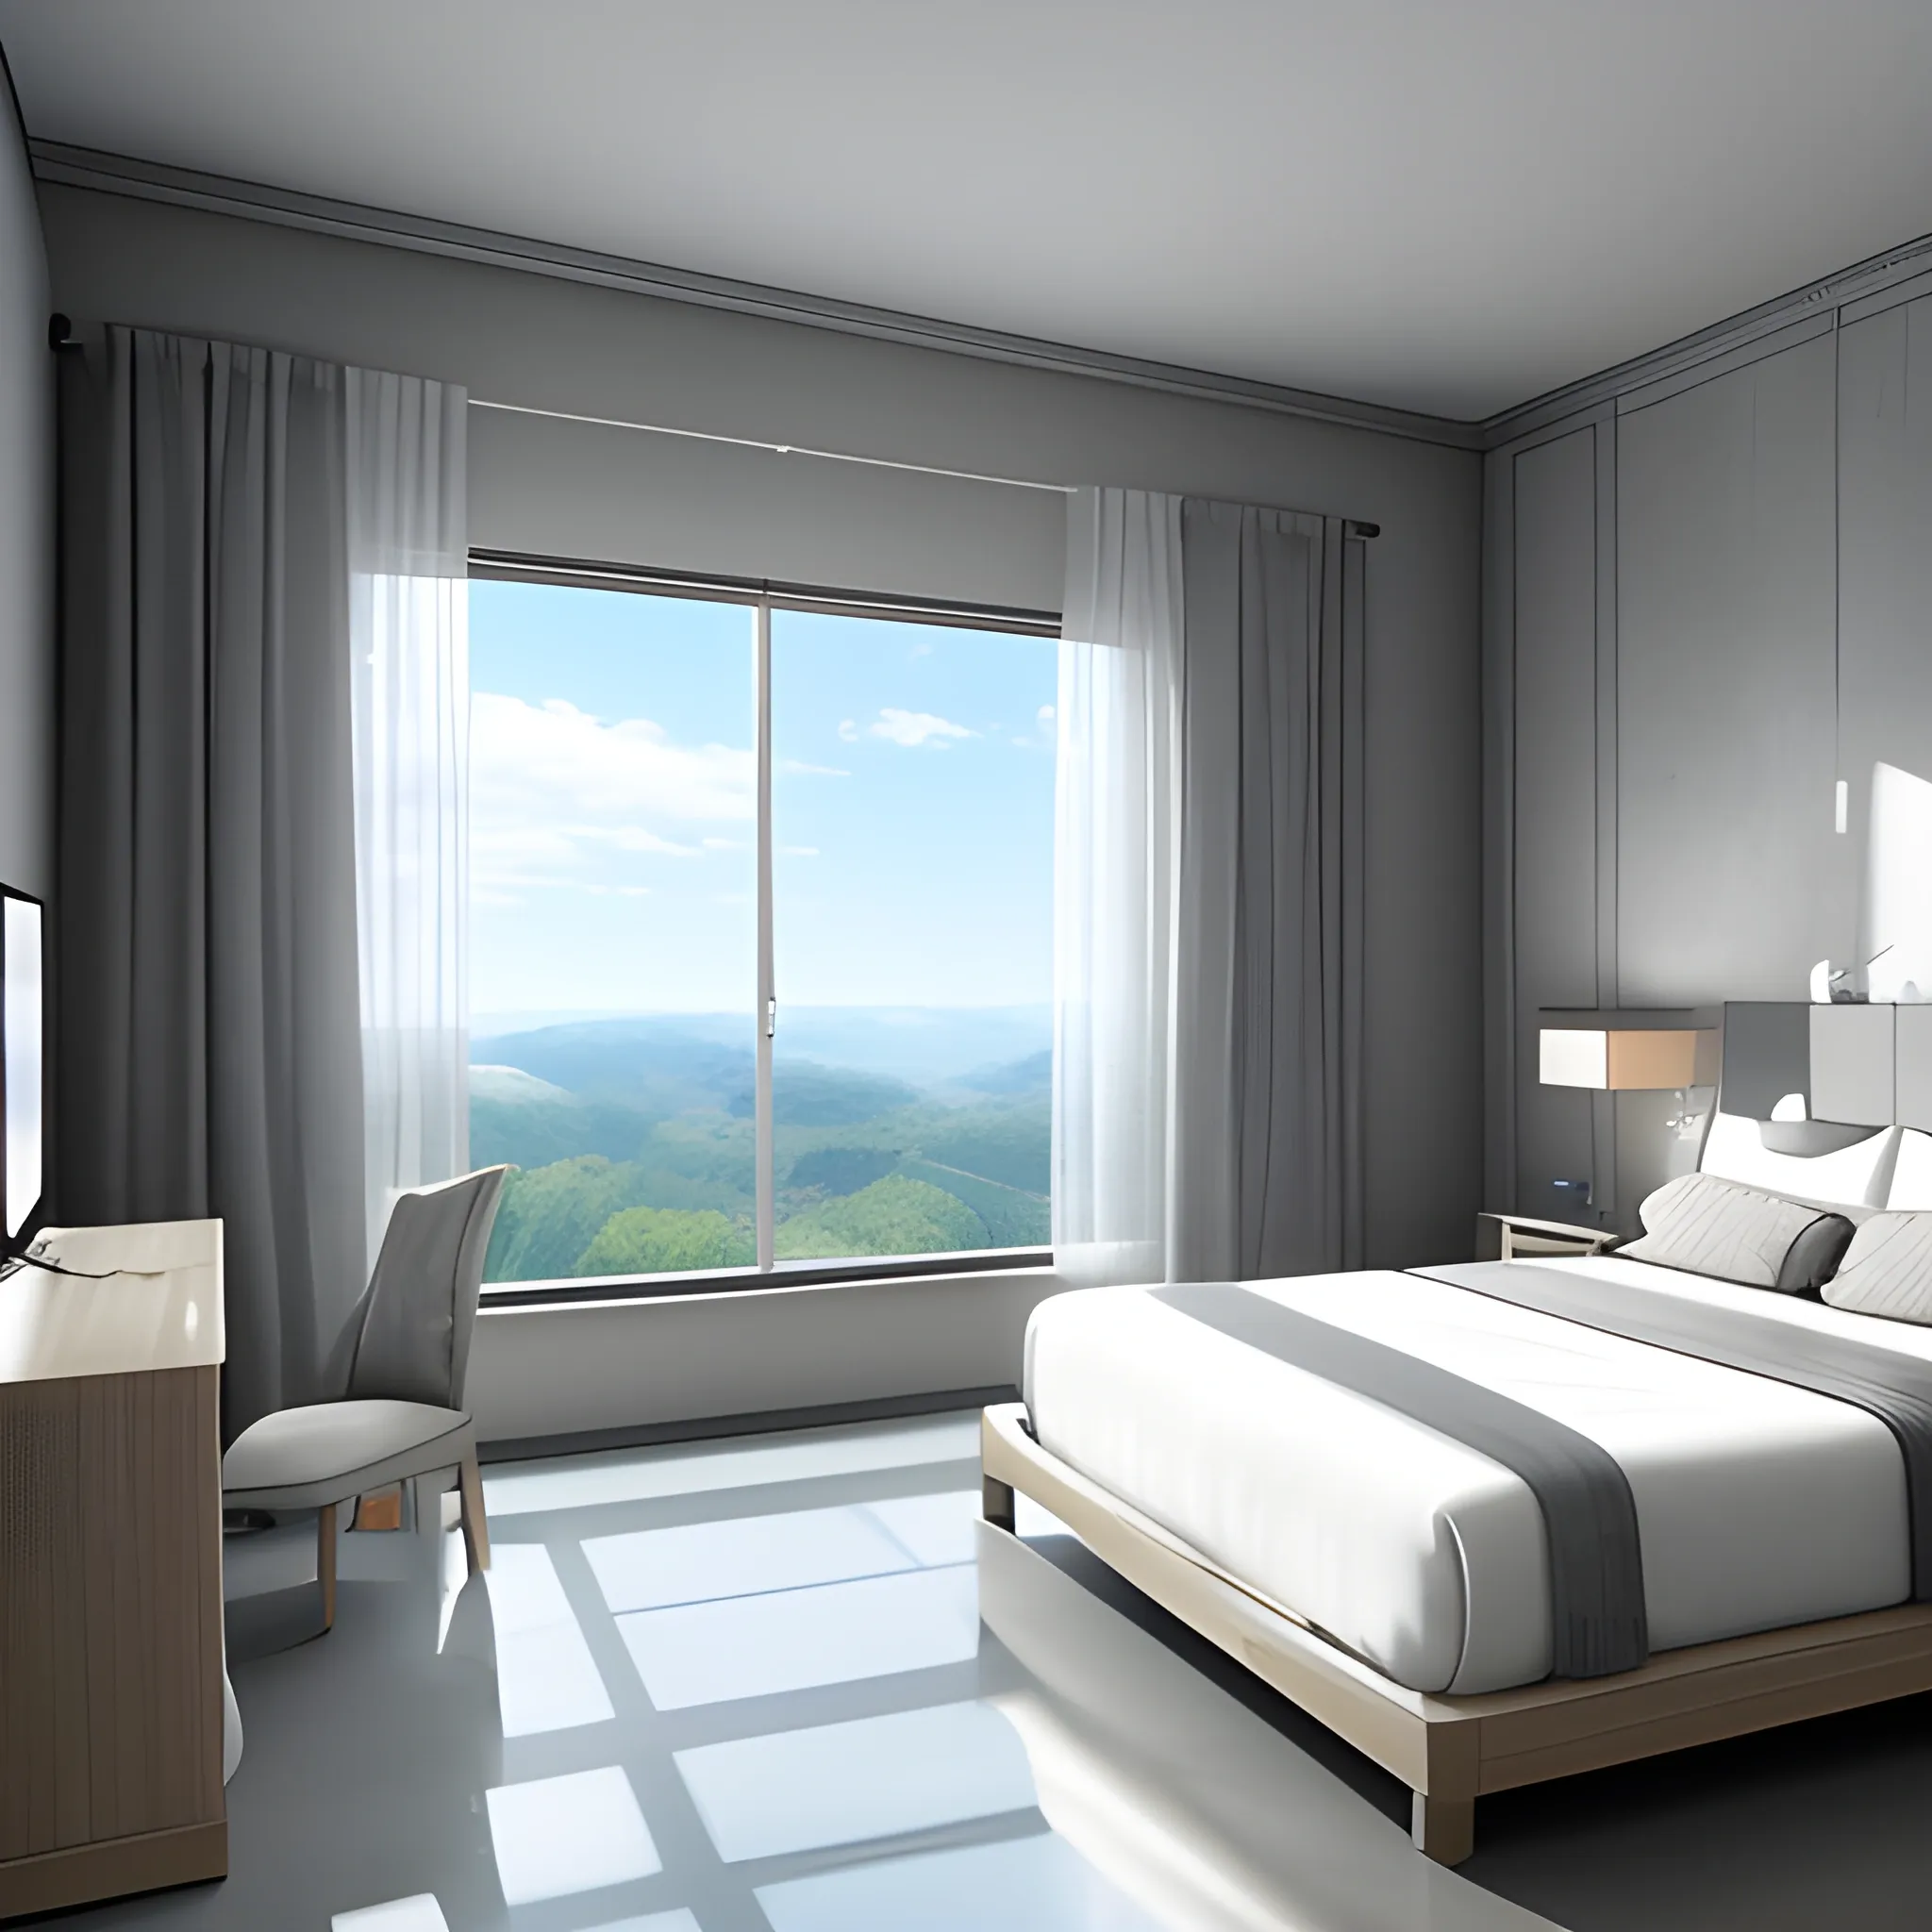 room with one of the 4 walls made of cristal that show a natural view, 3D, with bed, gray floor, with a setup